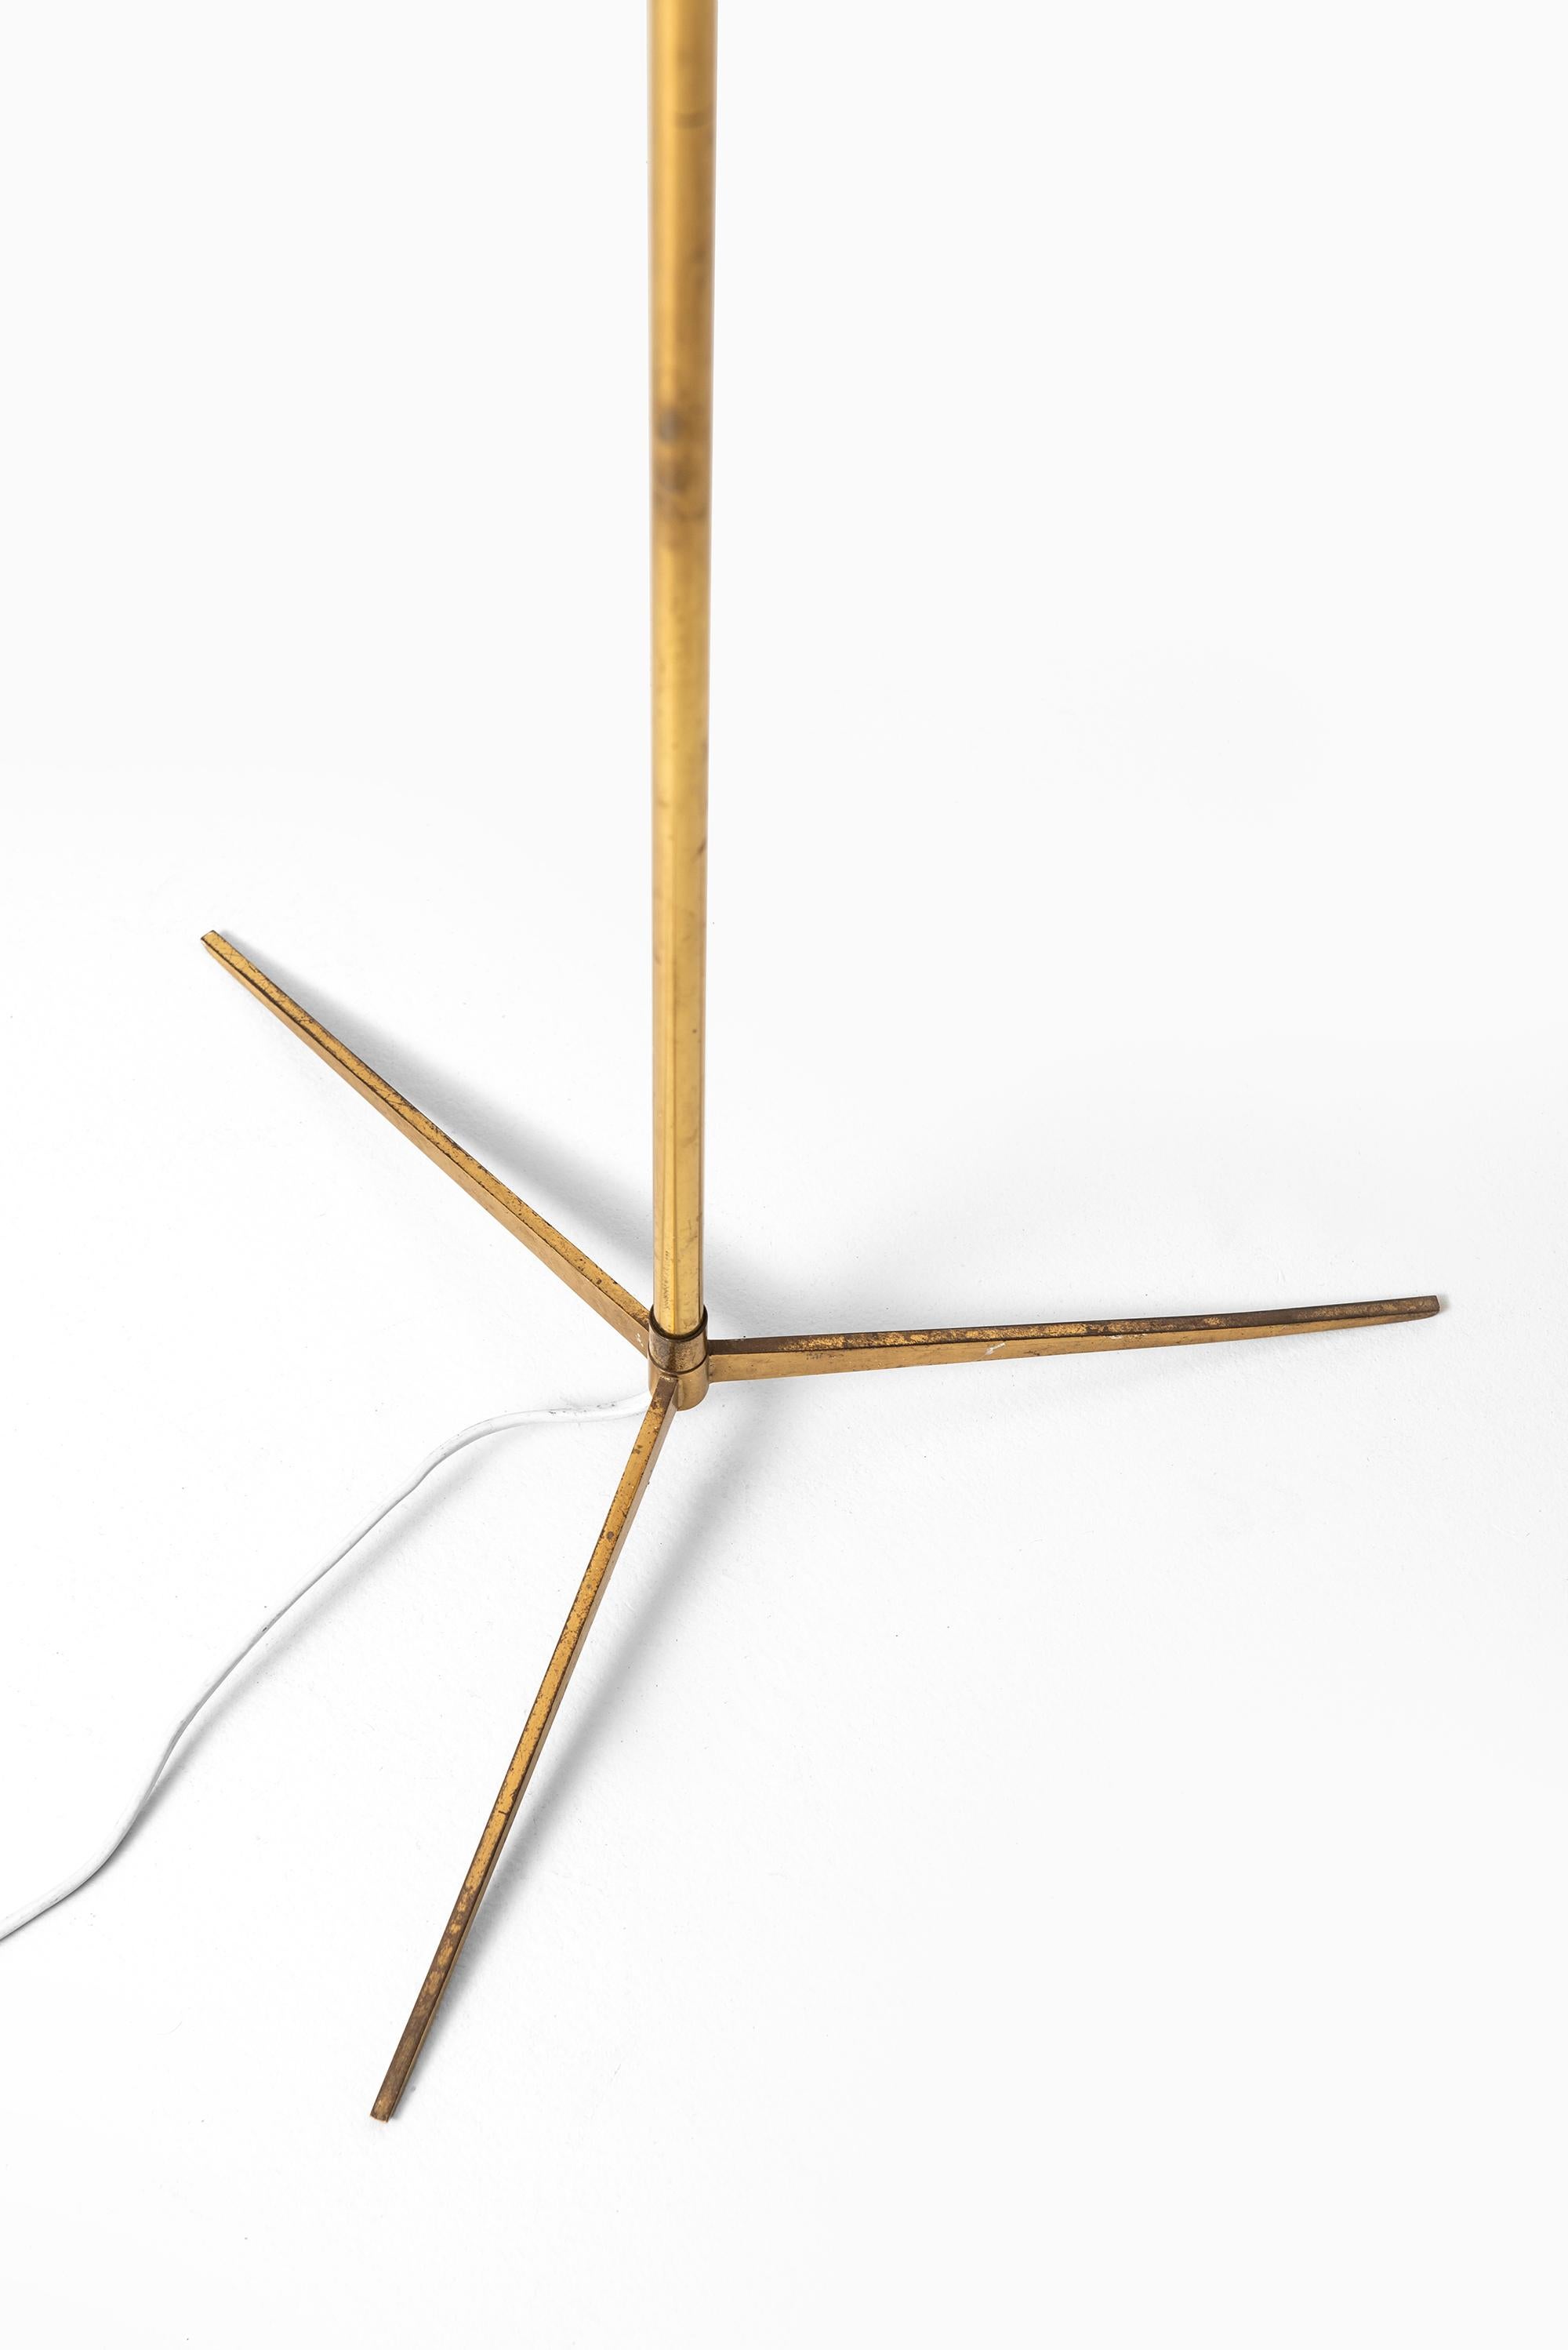 Very rare floor lamp designed by Svend Aage Holm Sørensen. Produced by Holm Sørensen & Co. in Denmark. Similar model is also available to make a pair. Please note: This will be sold without any lamp shade.